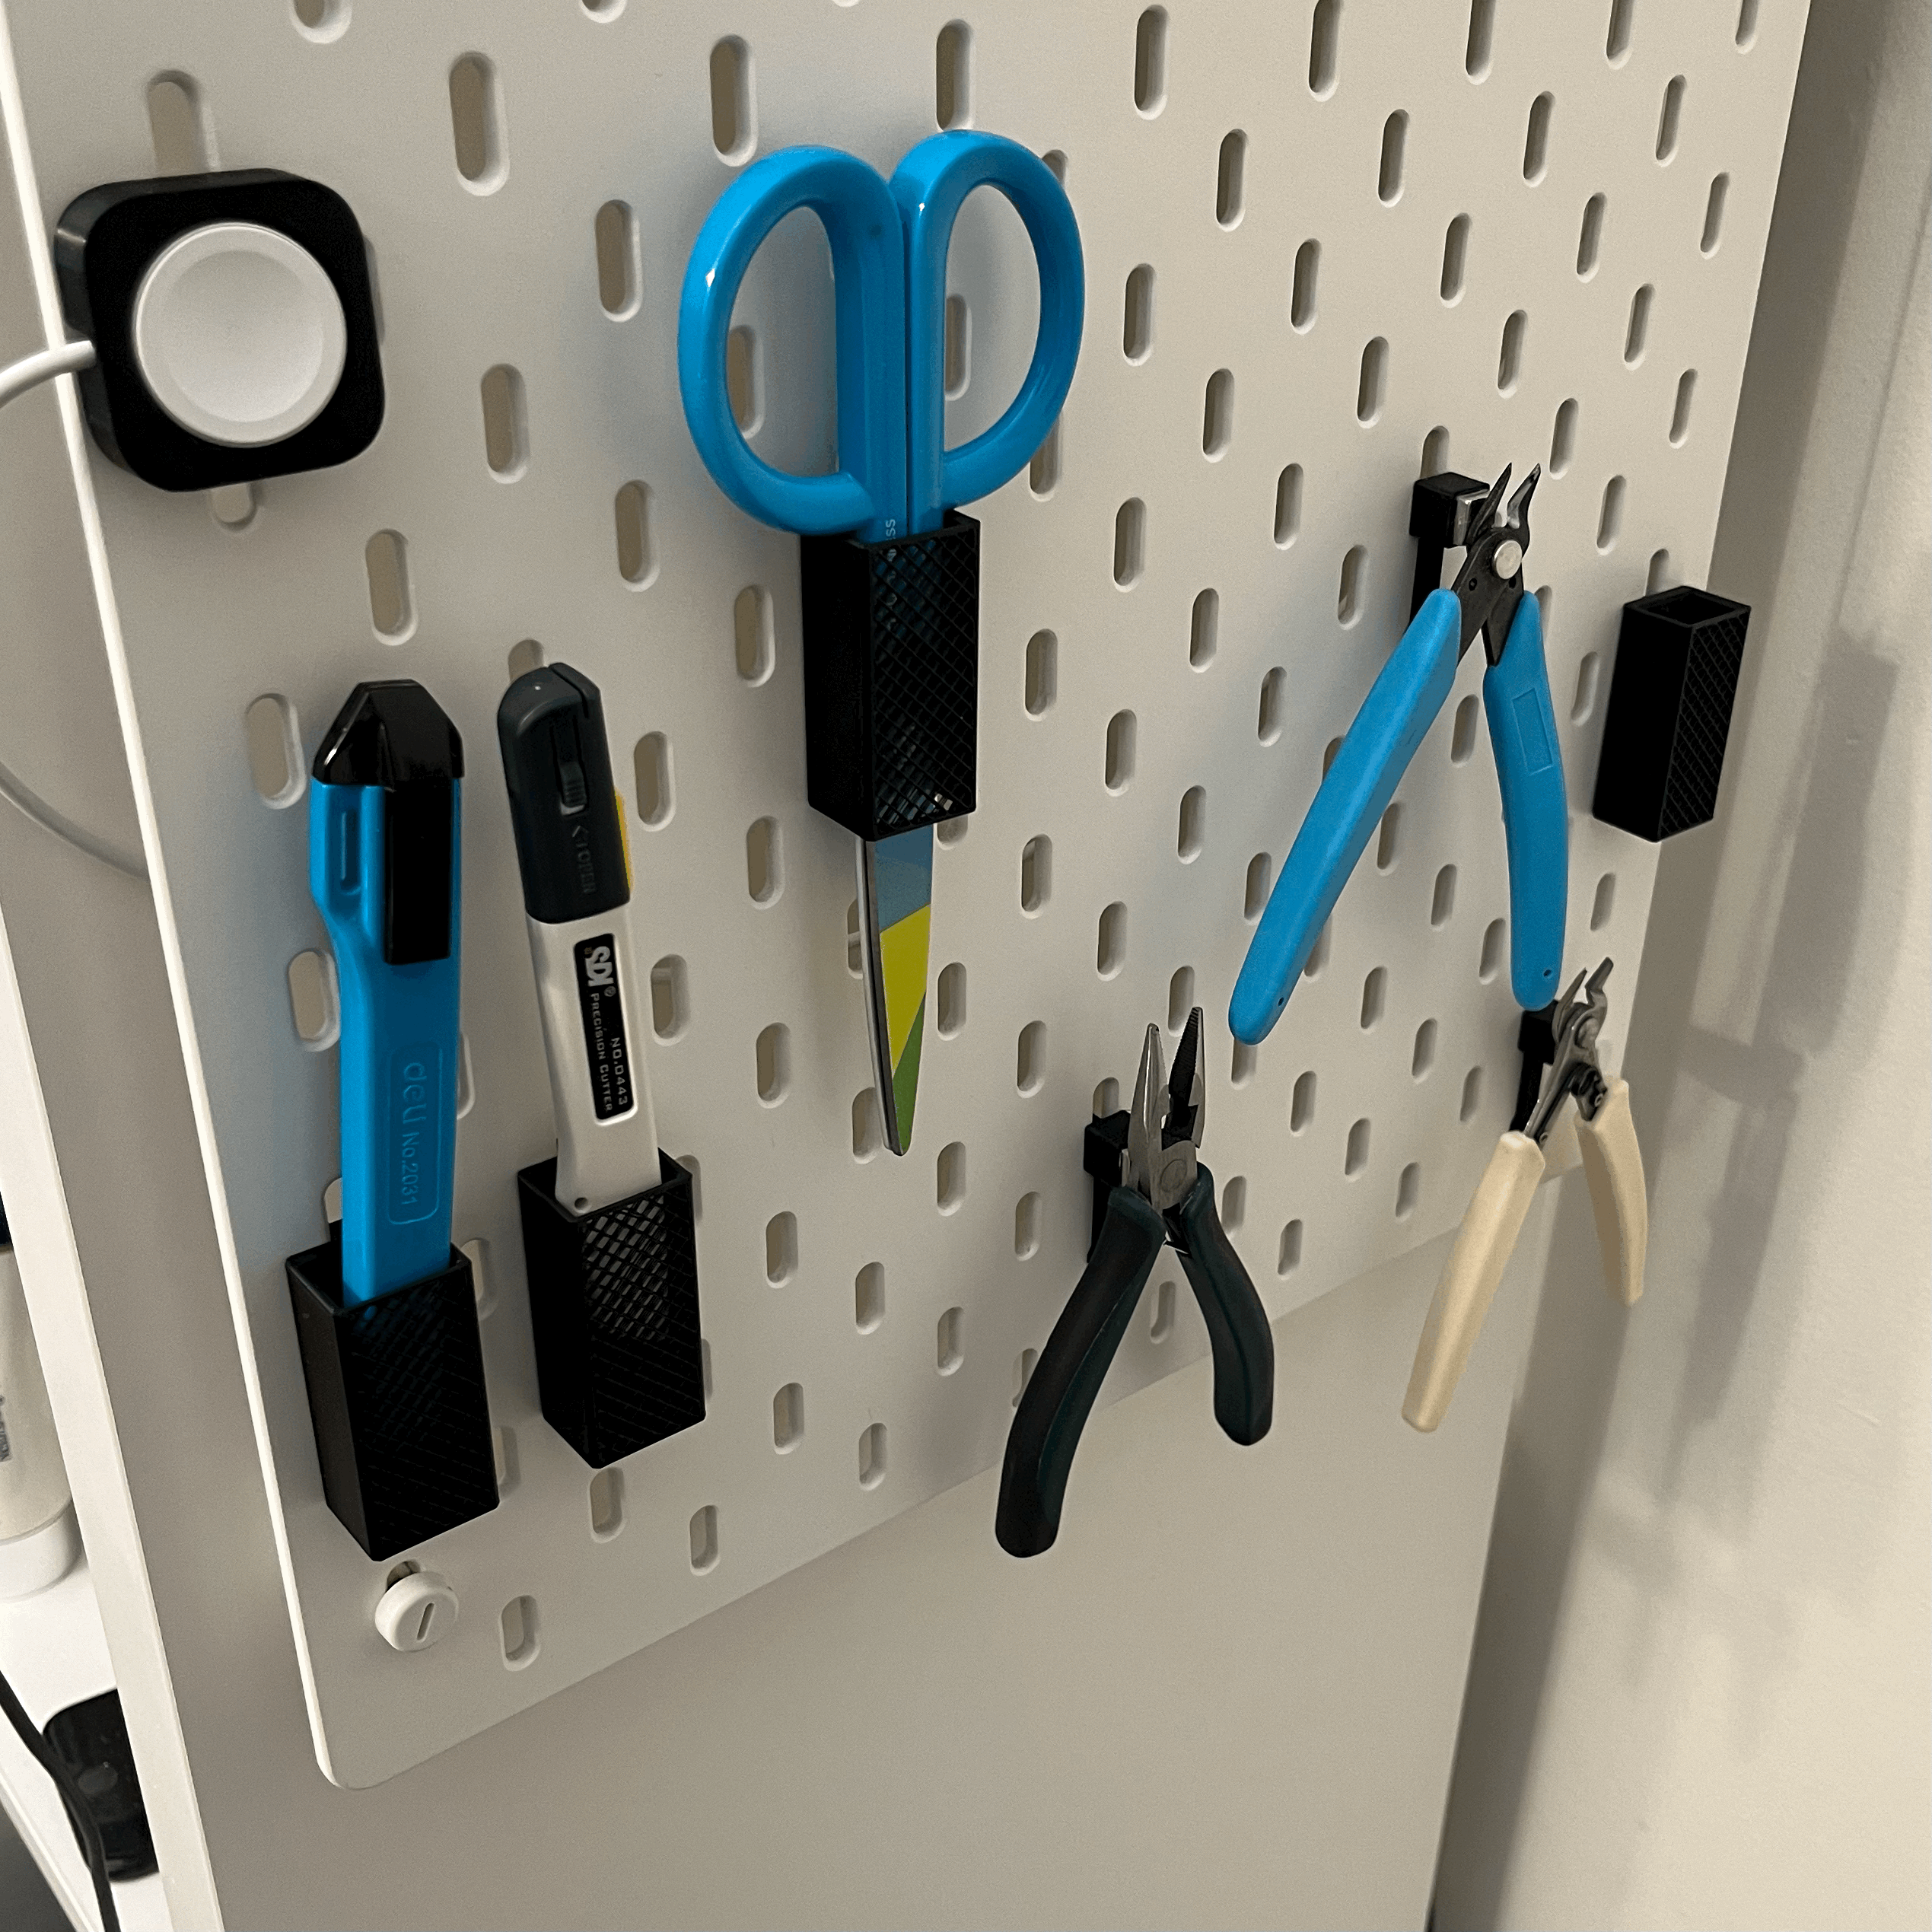 IKEA pegboard accessories by Oliver Xie